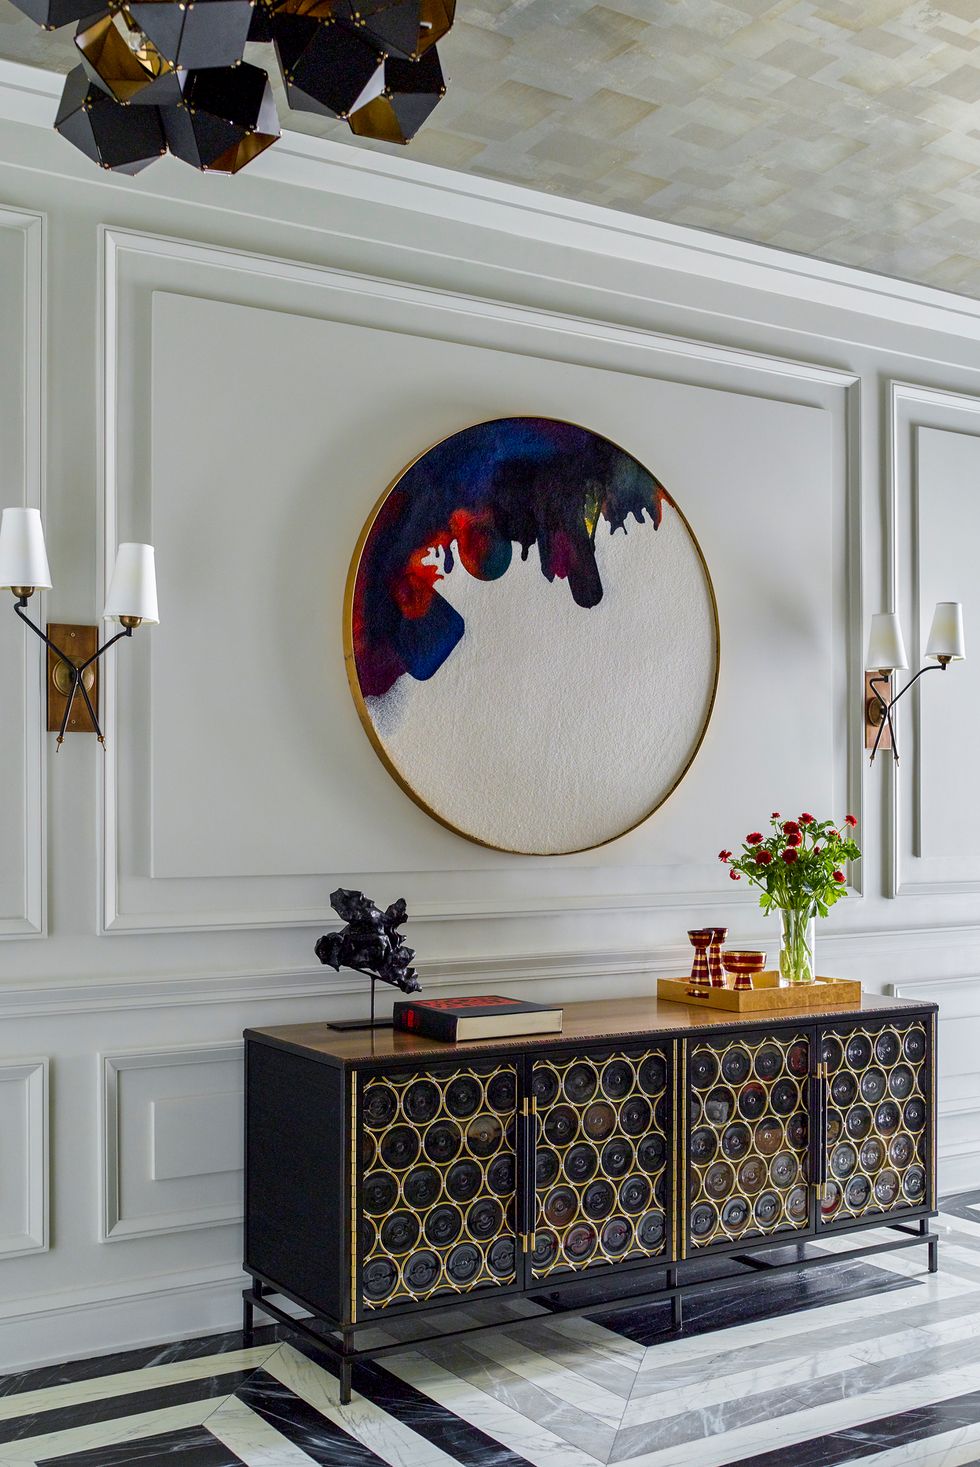 6 White Paint Dos and Don'ts, According to Interior Designers